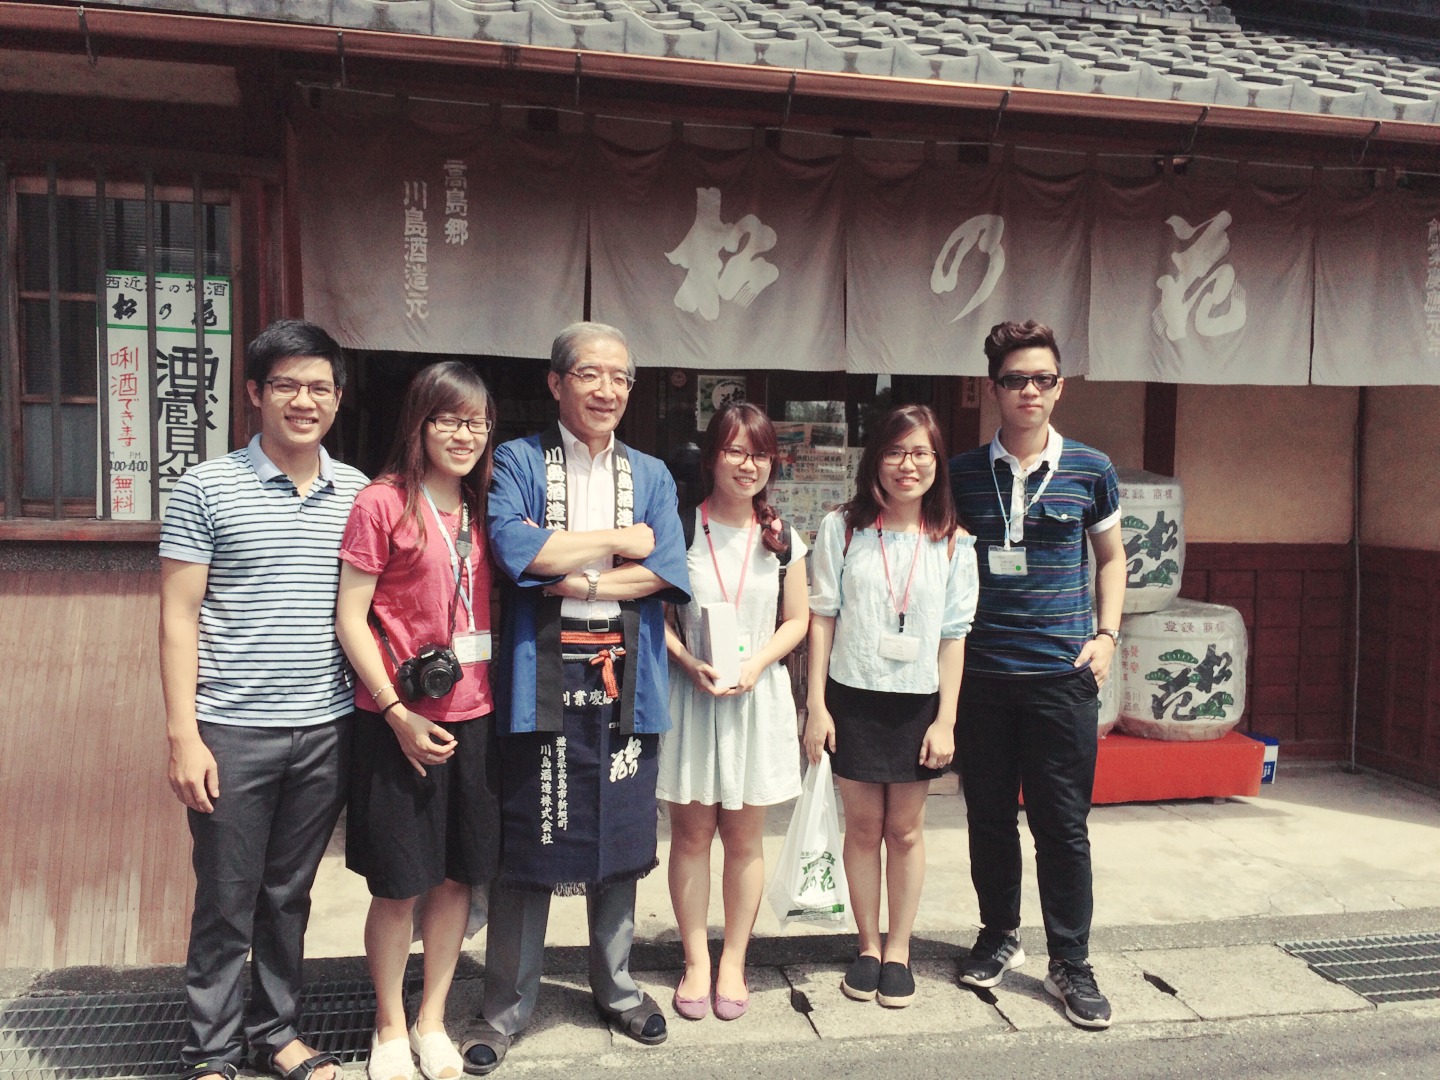 Bao (First from right) and friends visiting Sake wine manufacturing company. 